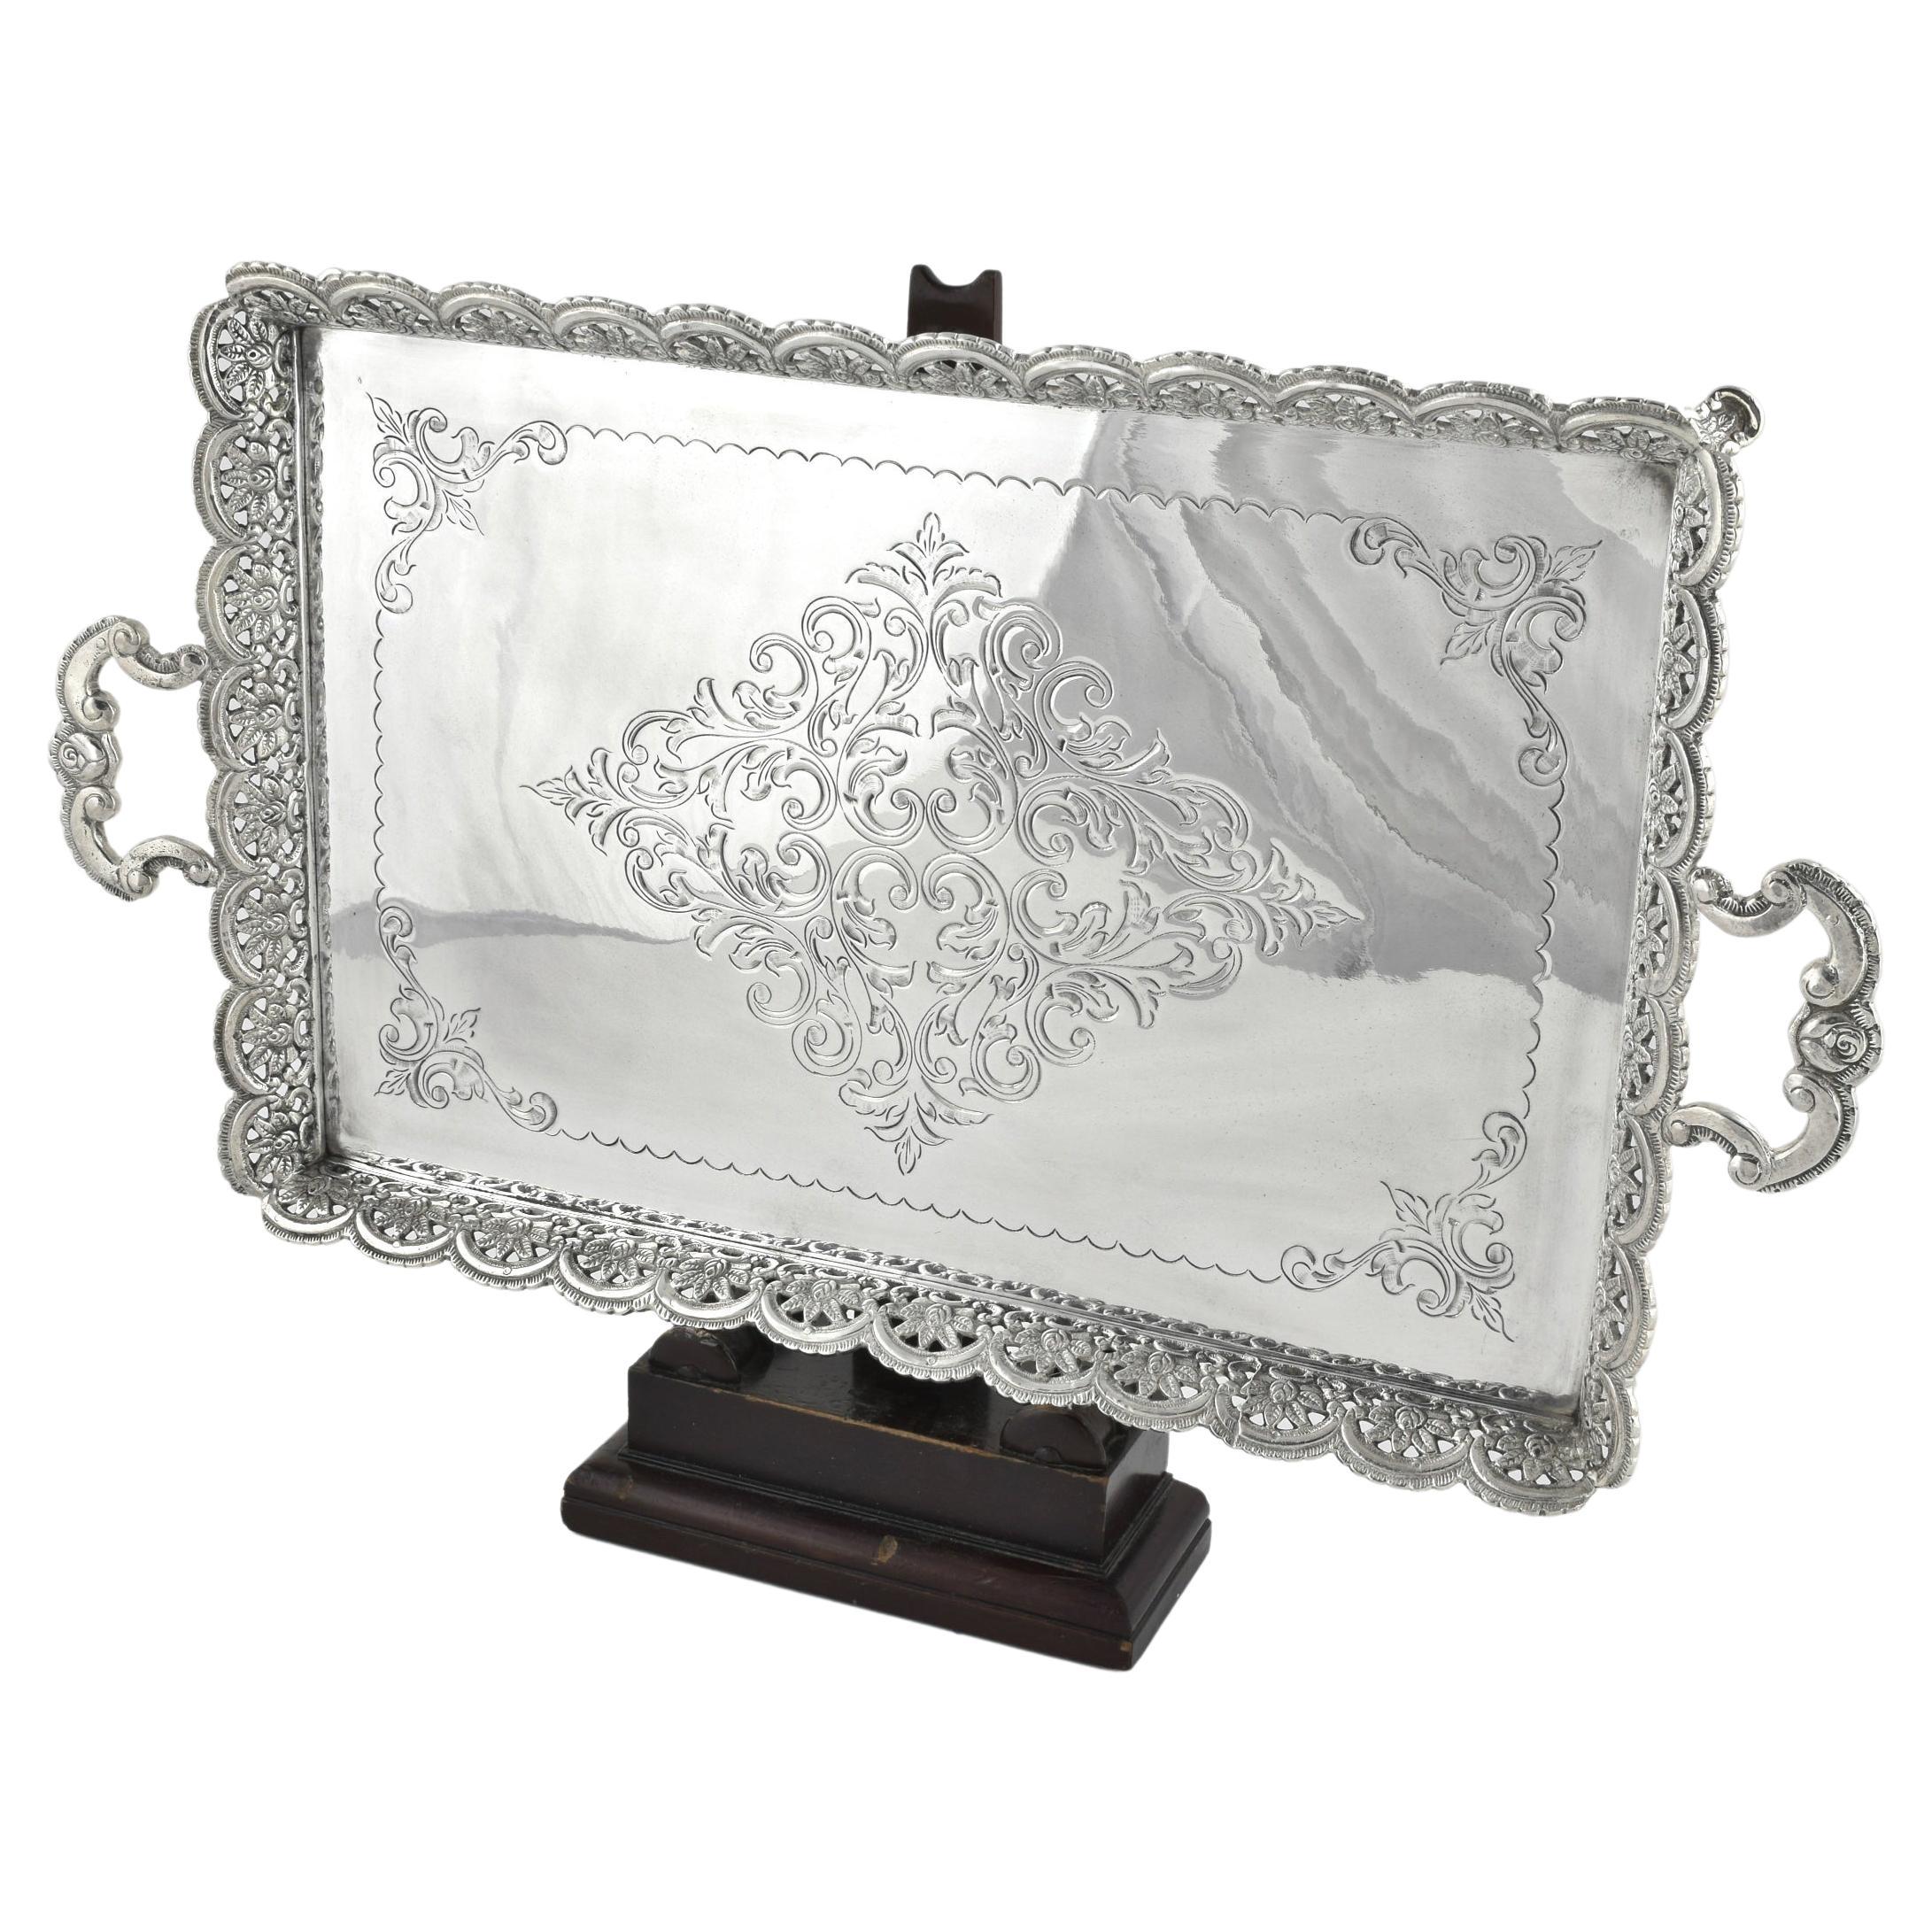 A silver plated gallery tray 